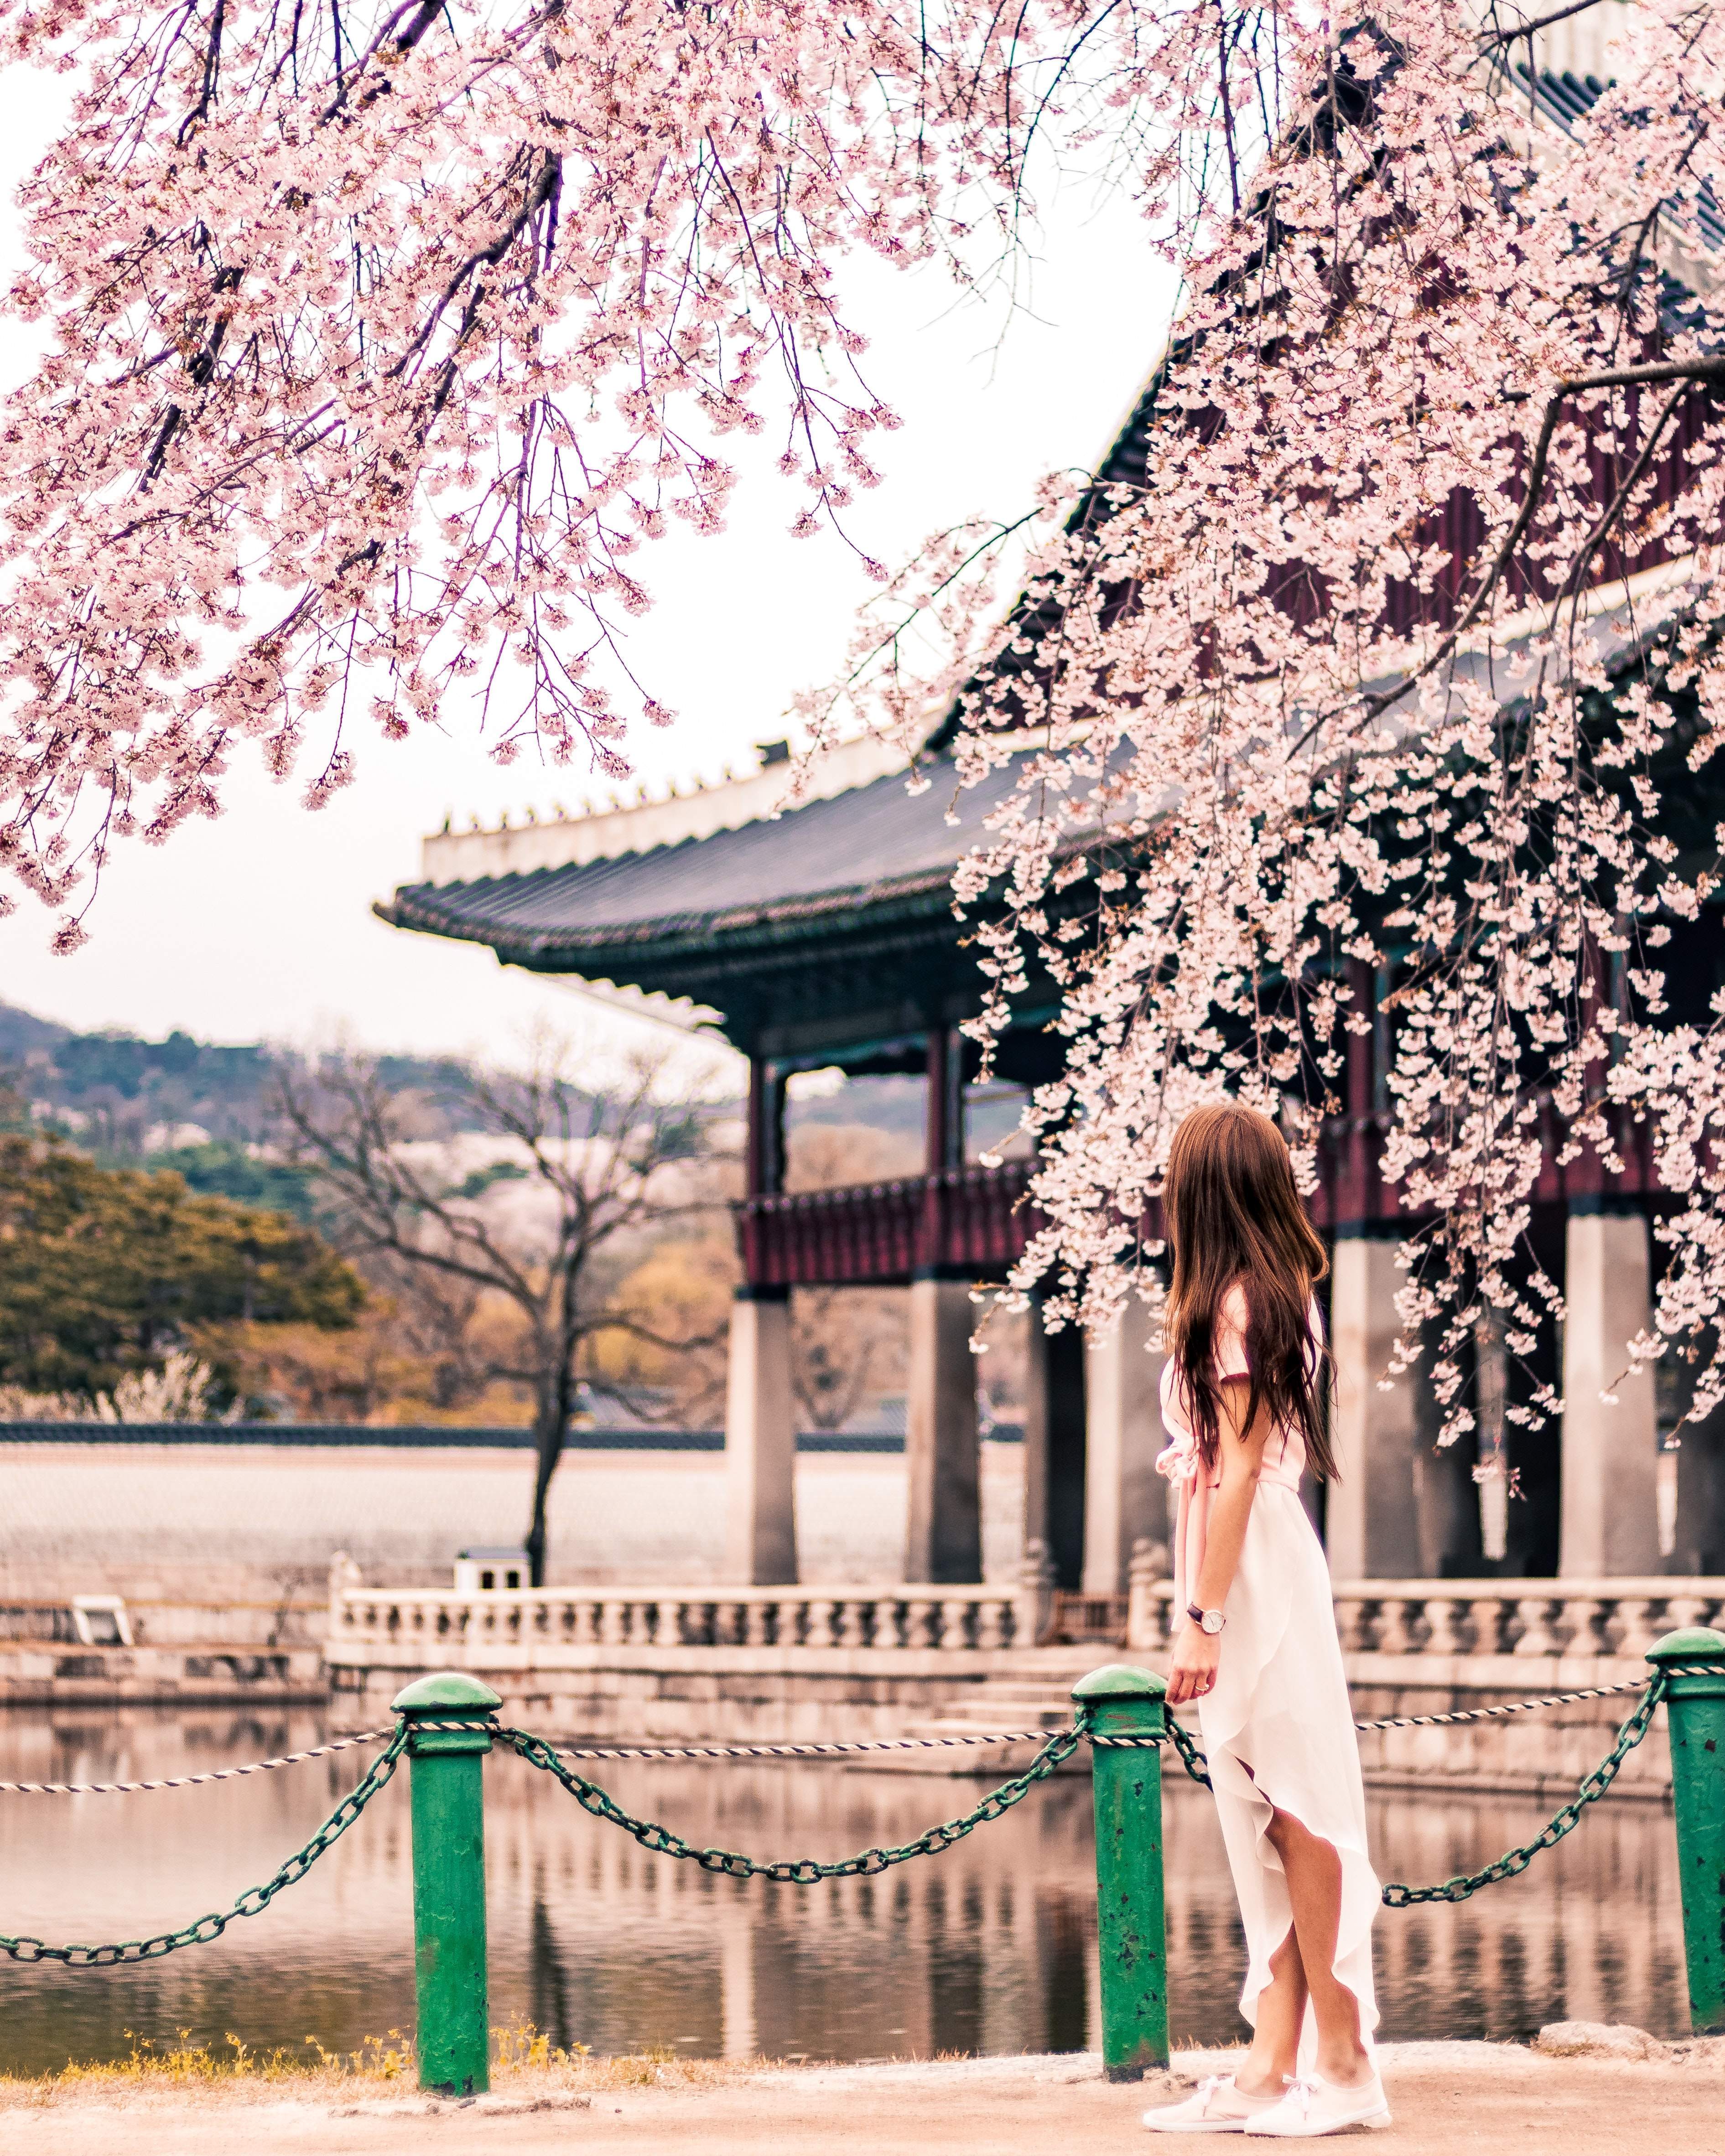 Cherry blossoms in Seoul, one of many places across Asia famous for its springtime colour. Photo: Pexels